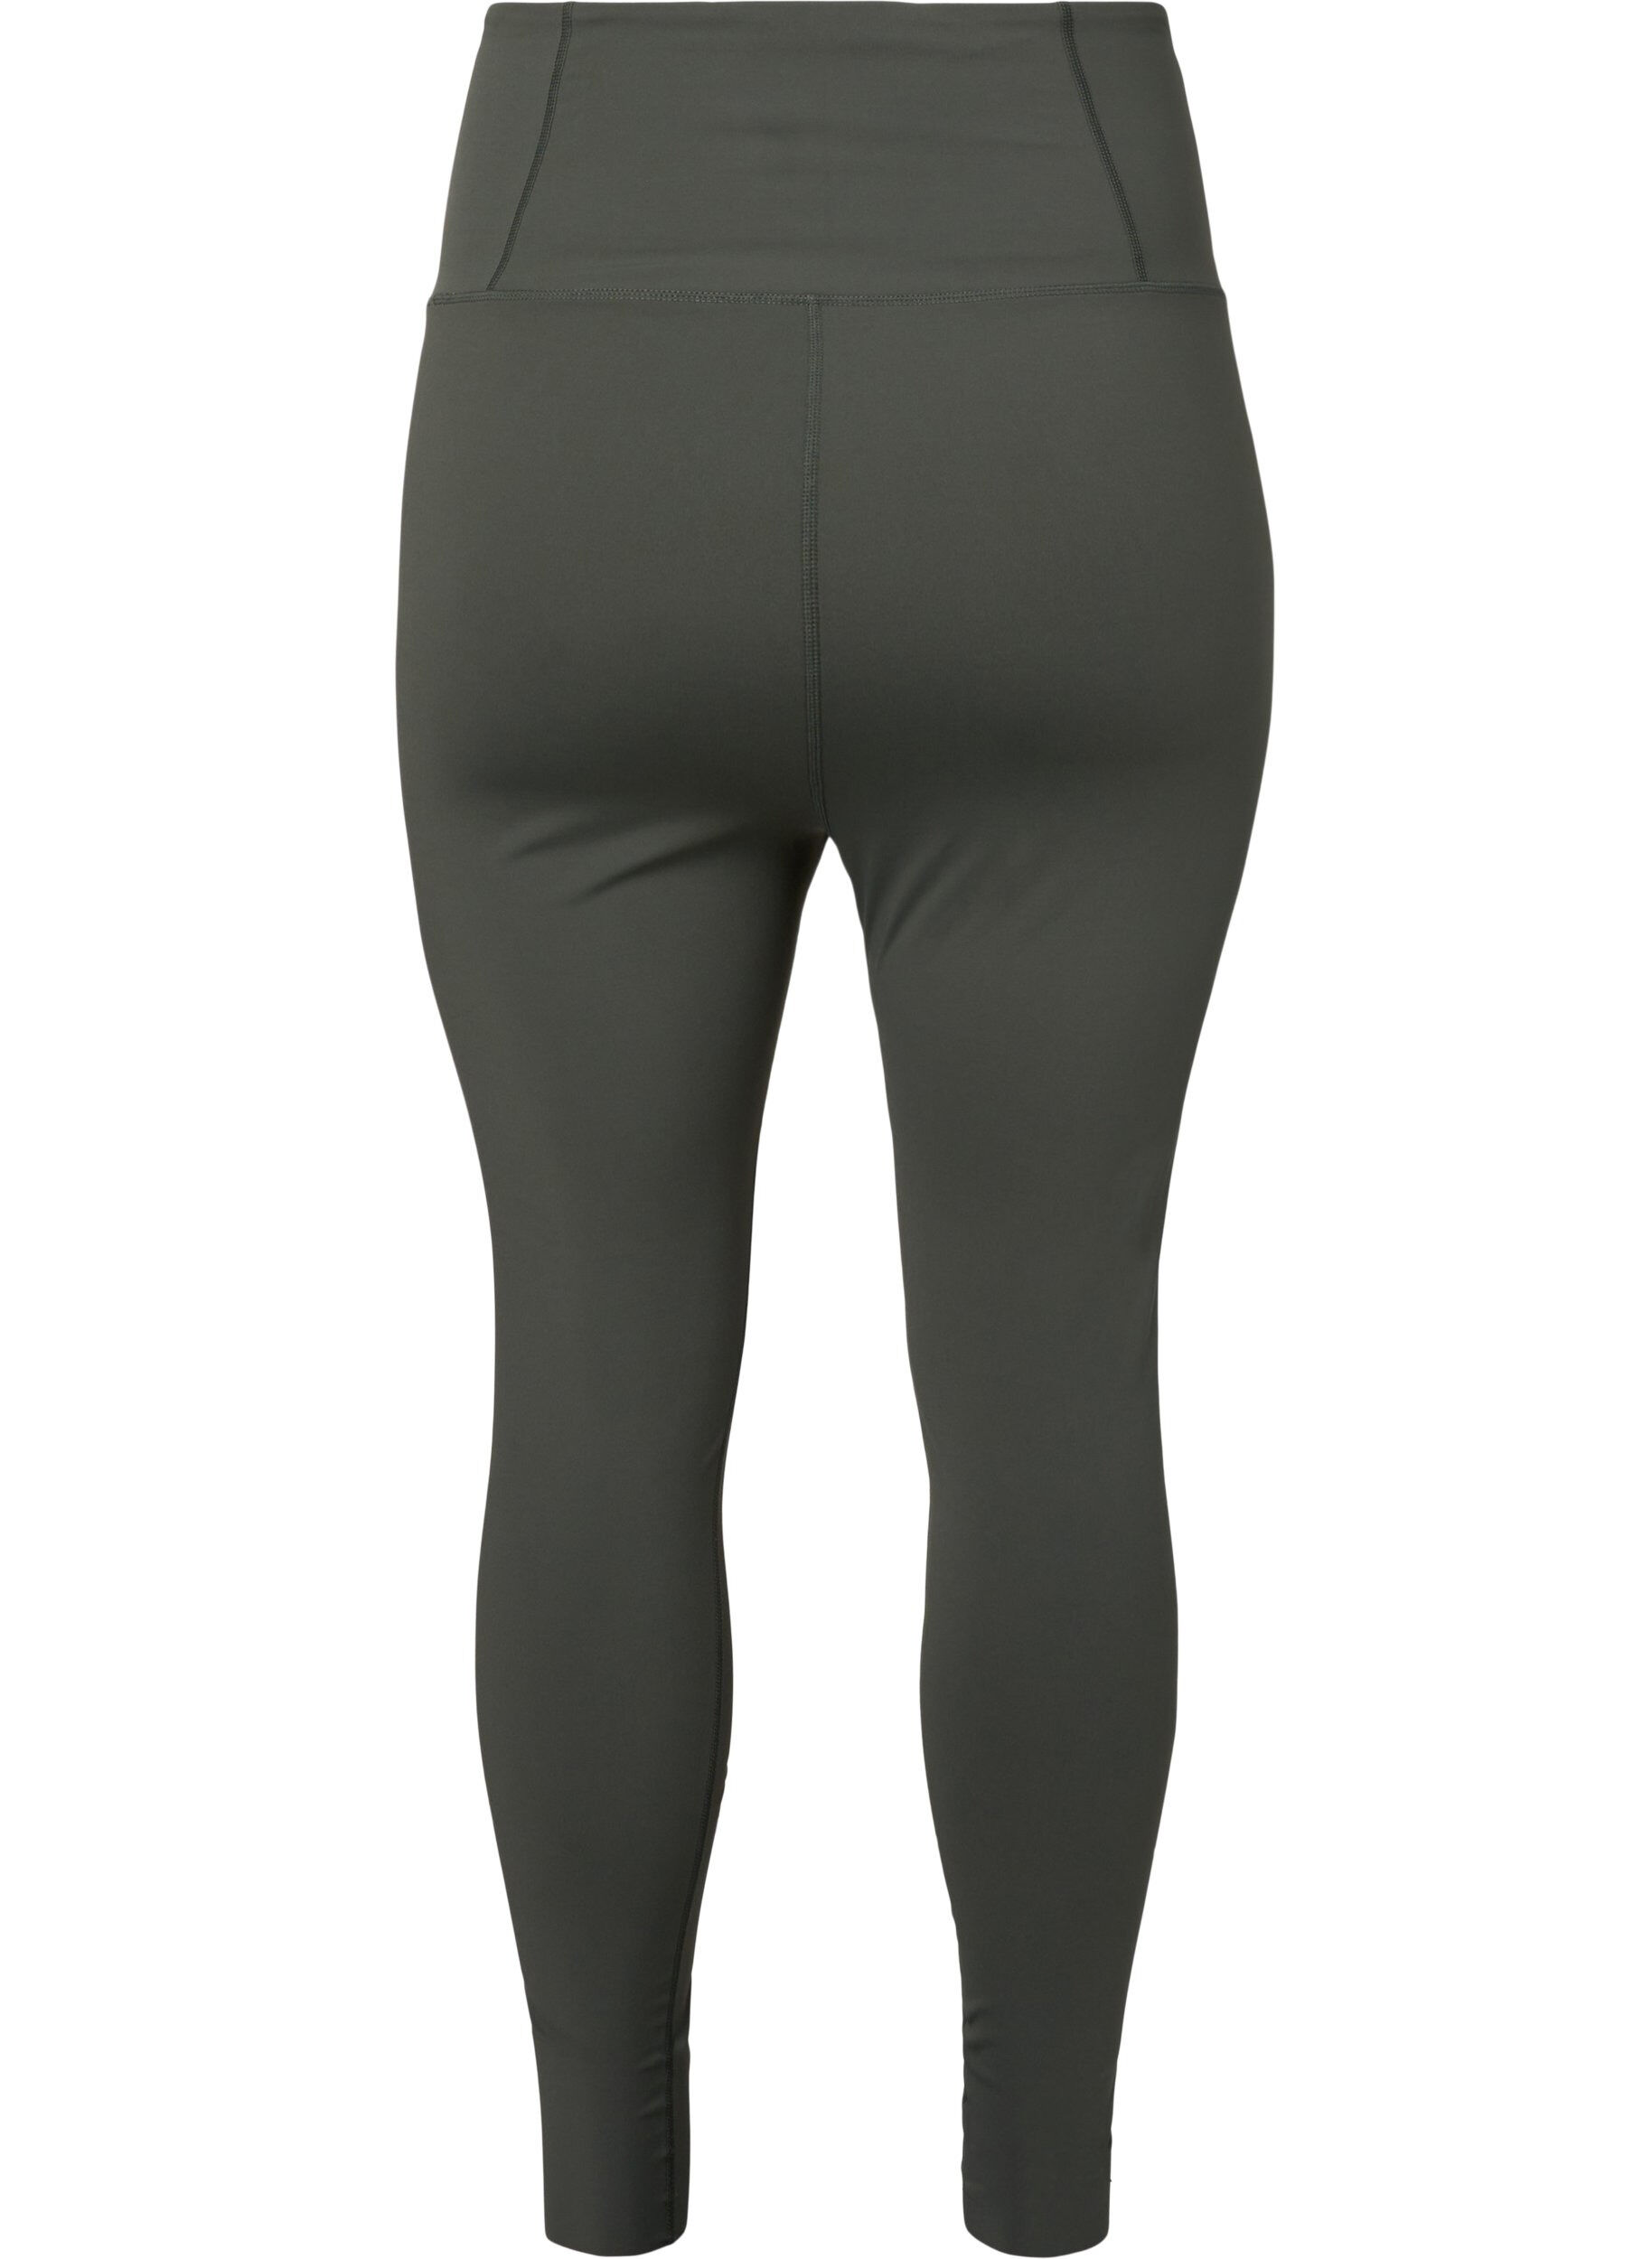 CORE, SUPER TENSION TIGHTS - Leggings with inner pocket - Green 